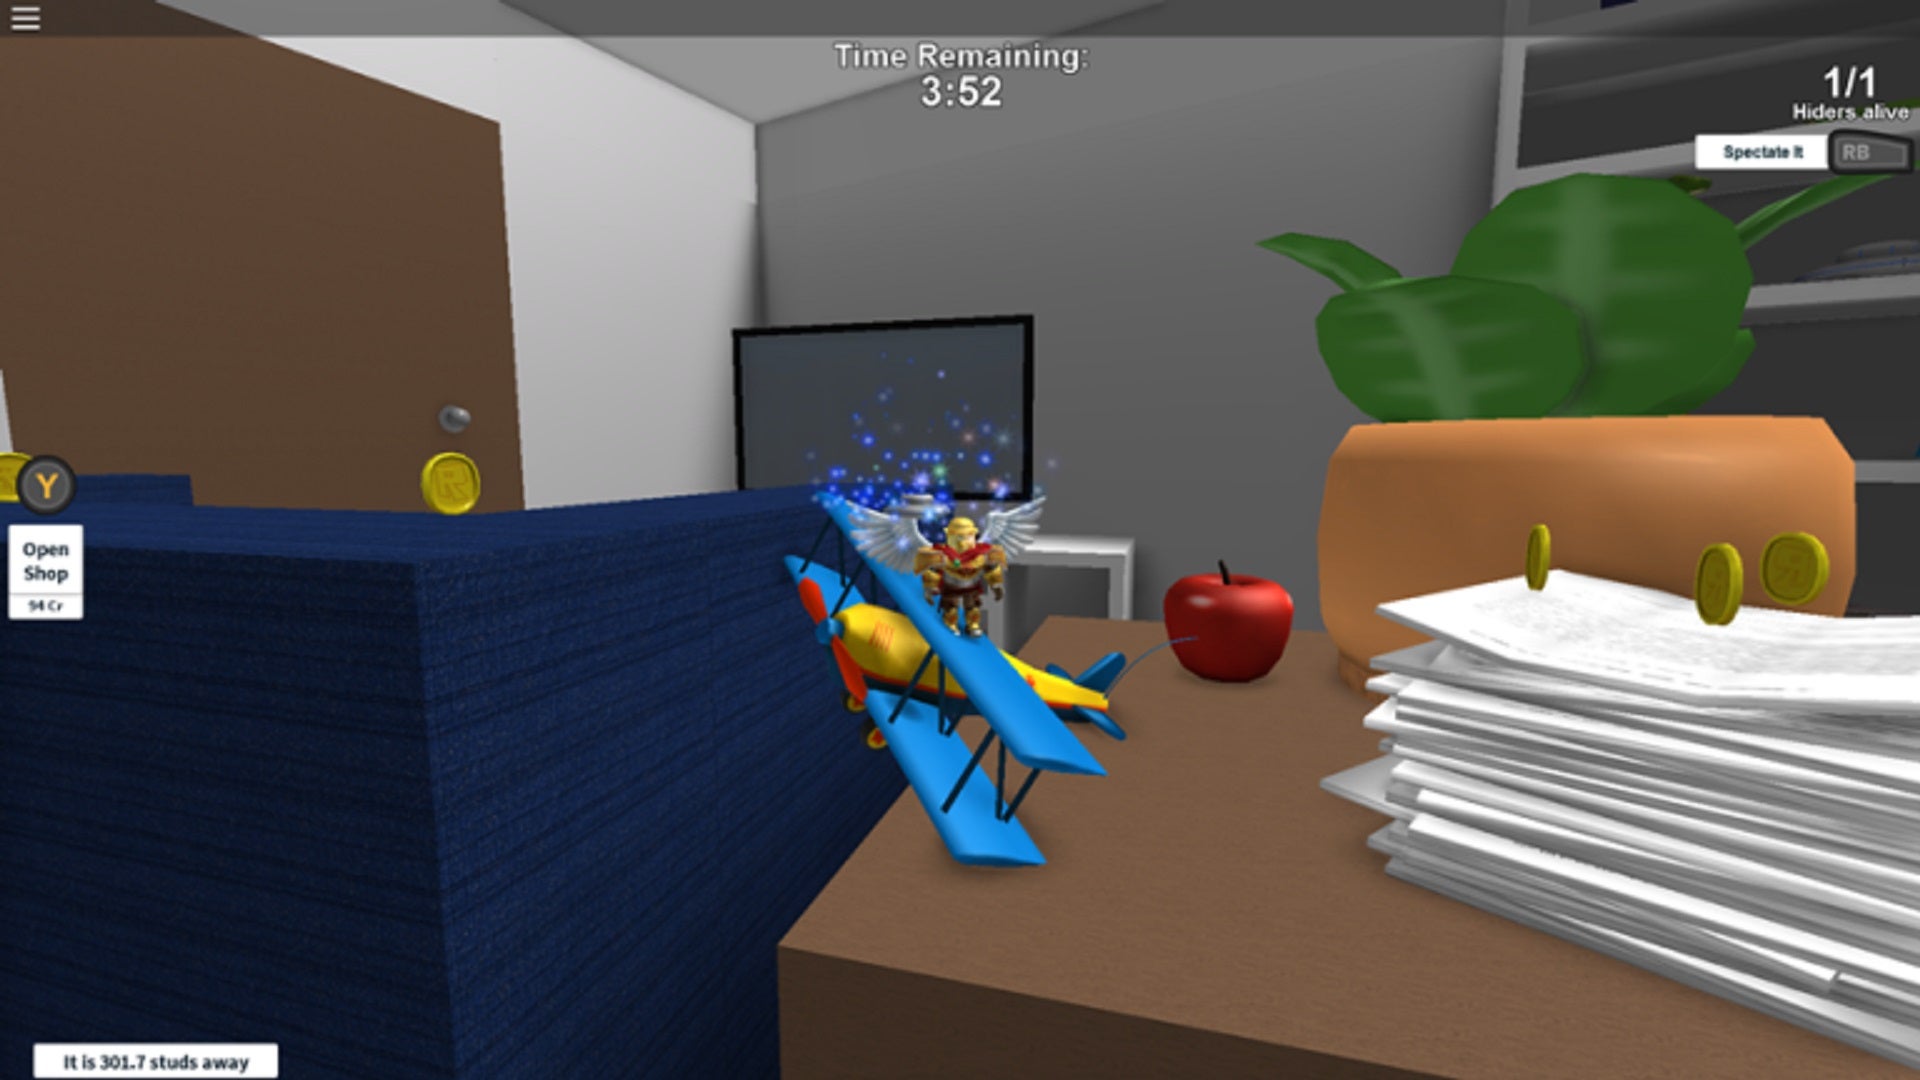 A winged Roblox character traverses a giant living room by jumping on a toy aeroplane on a table.